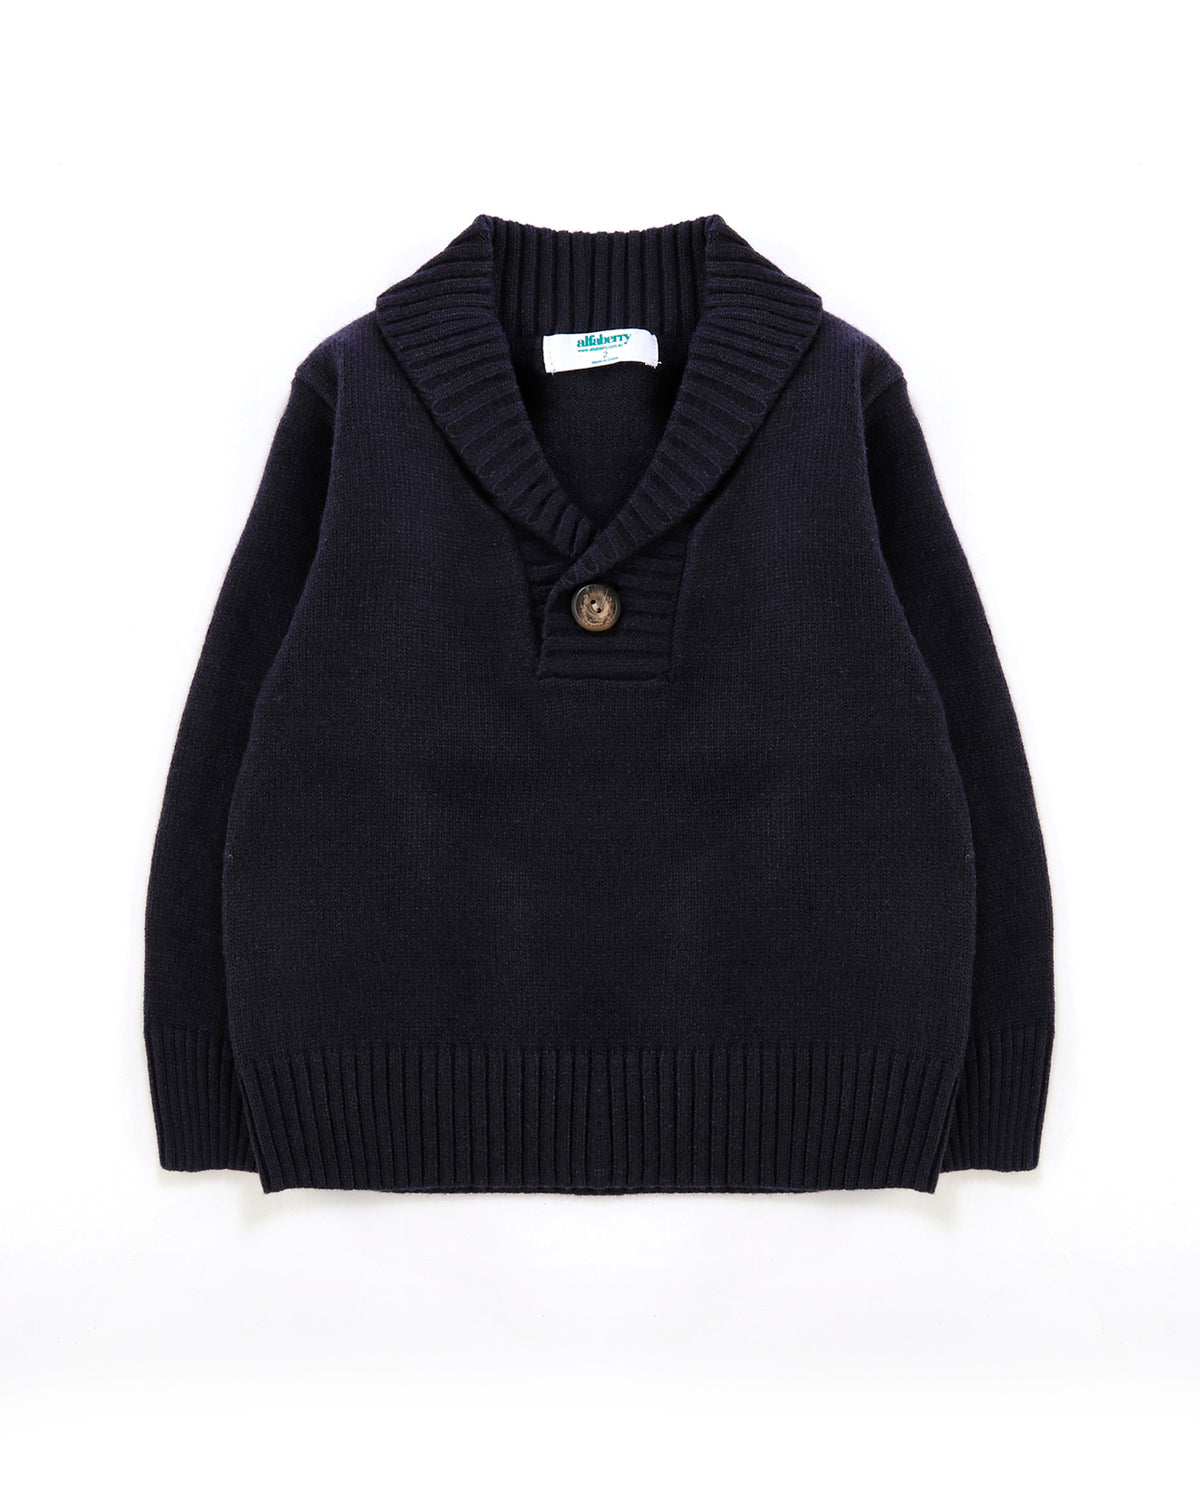 Good Times Collared Jumper in Navy Front